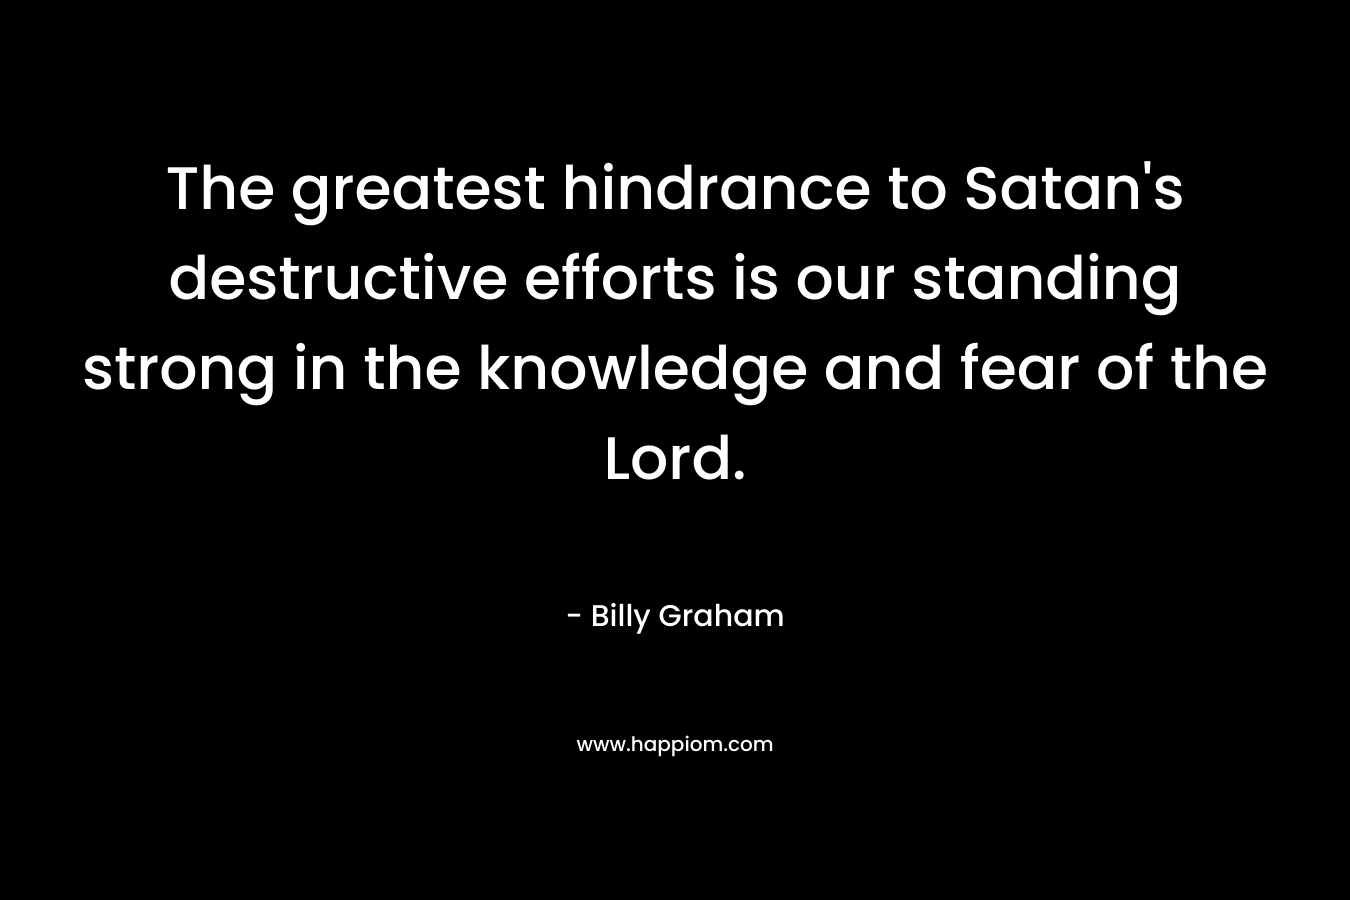 The greatest hindrance to Satan’s destructive efforts is our standing strong in the knowledge and fear of the Lord. – Billy Graham